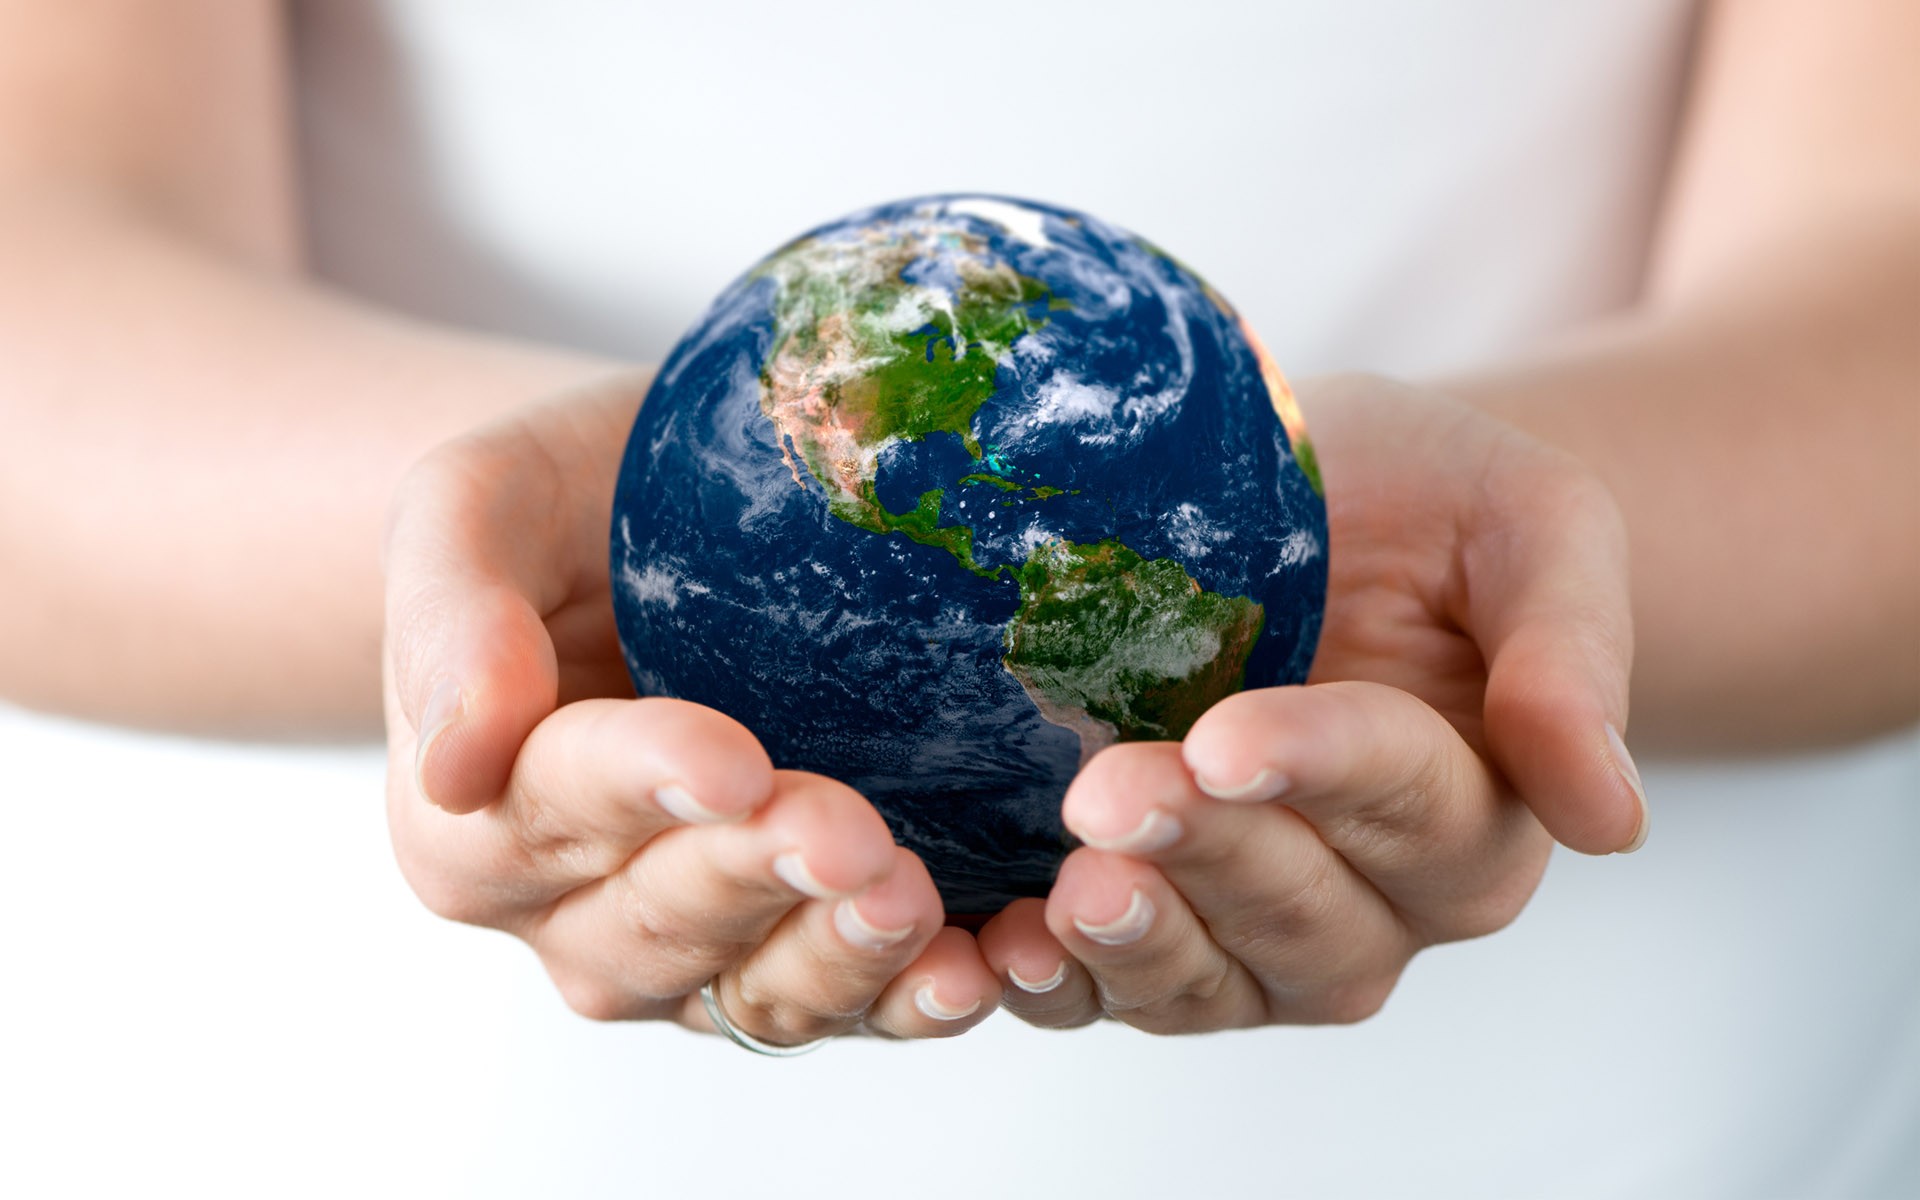 People 1920x1200 Earth globes miniatures hands fingers symbols planet